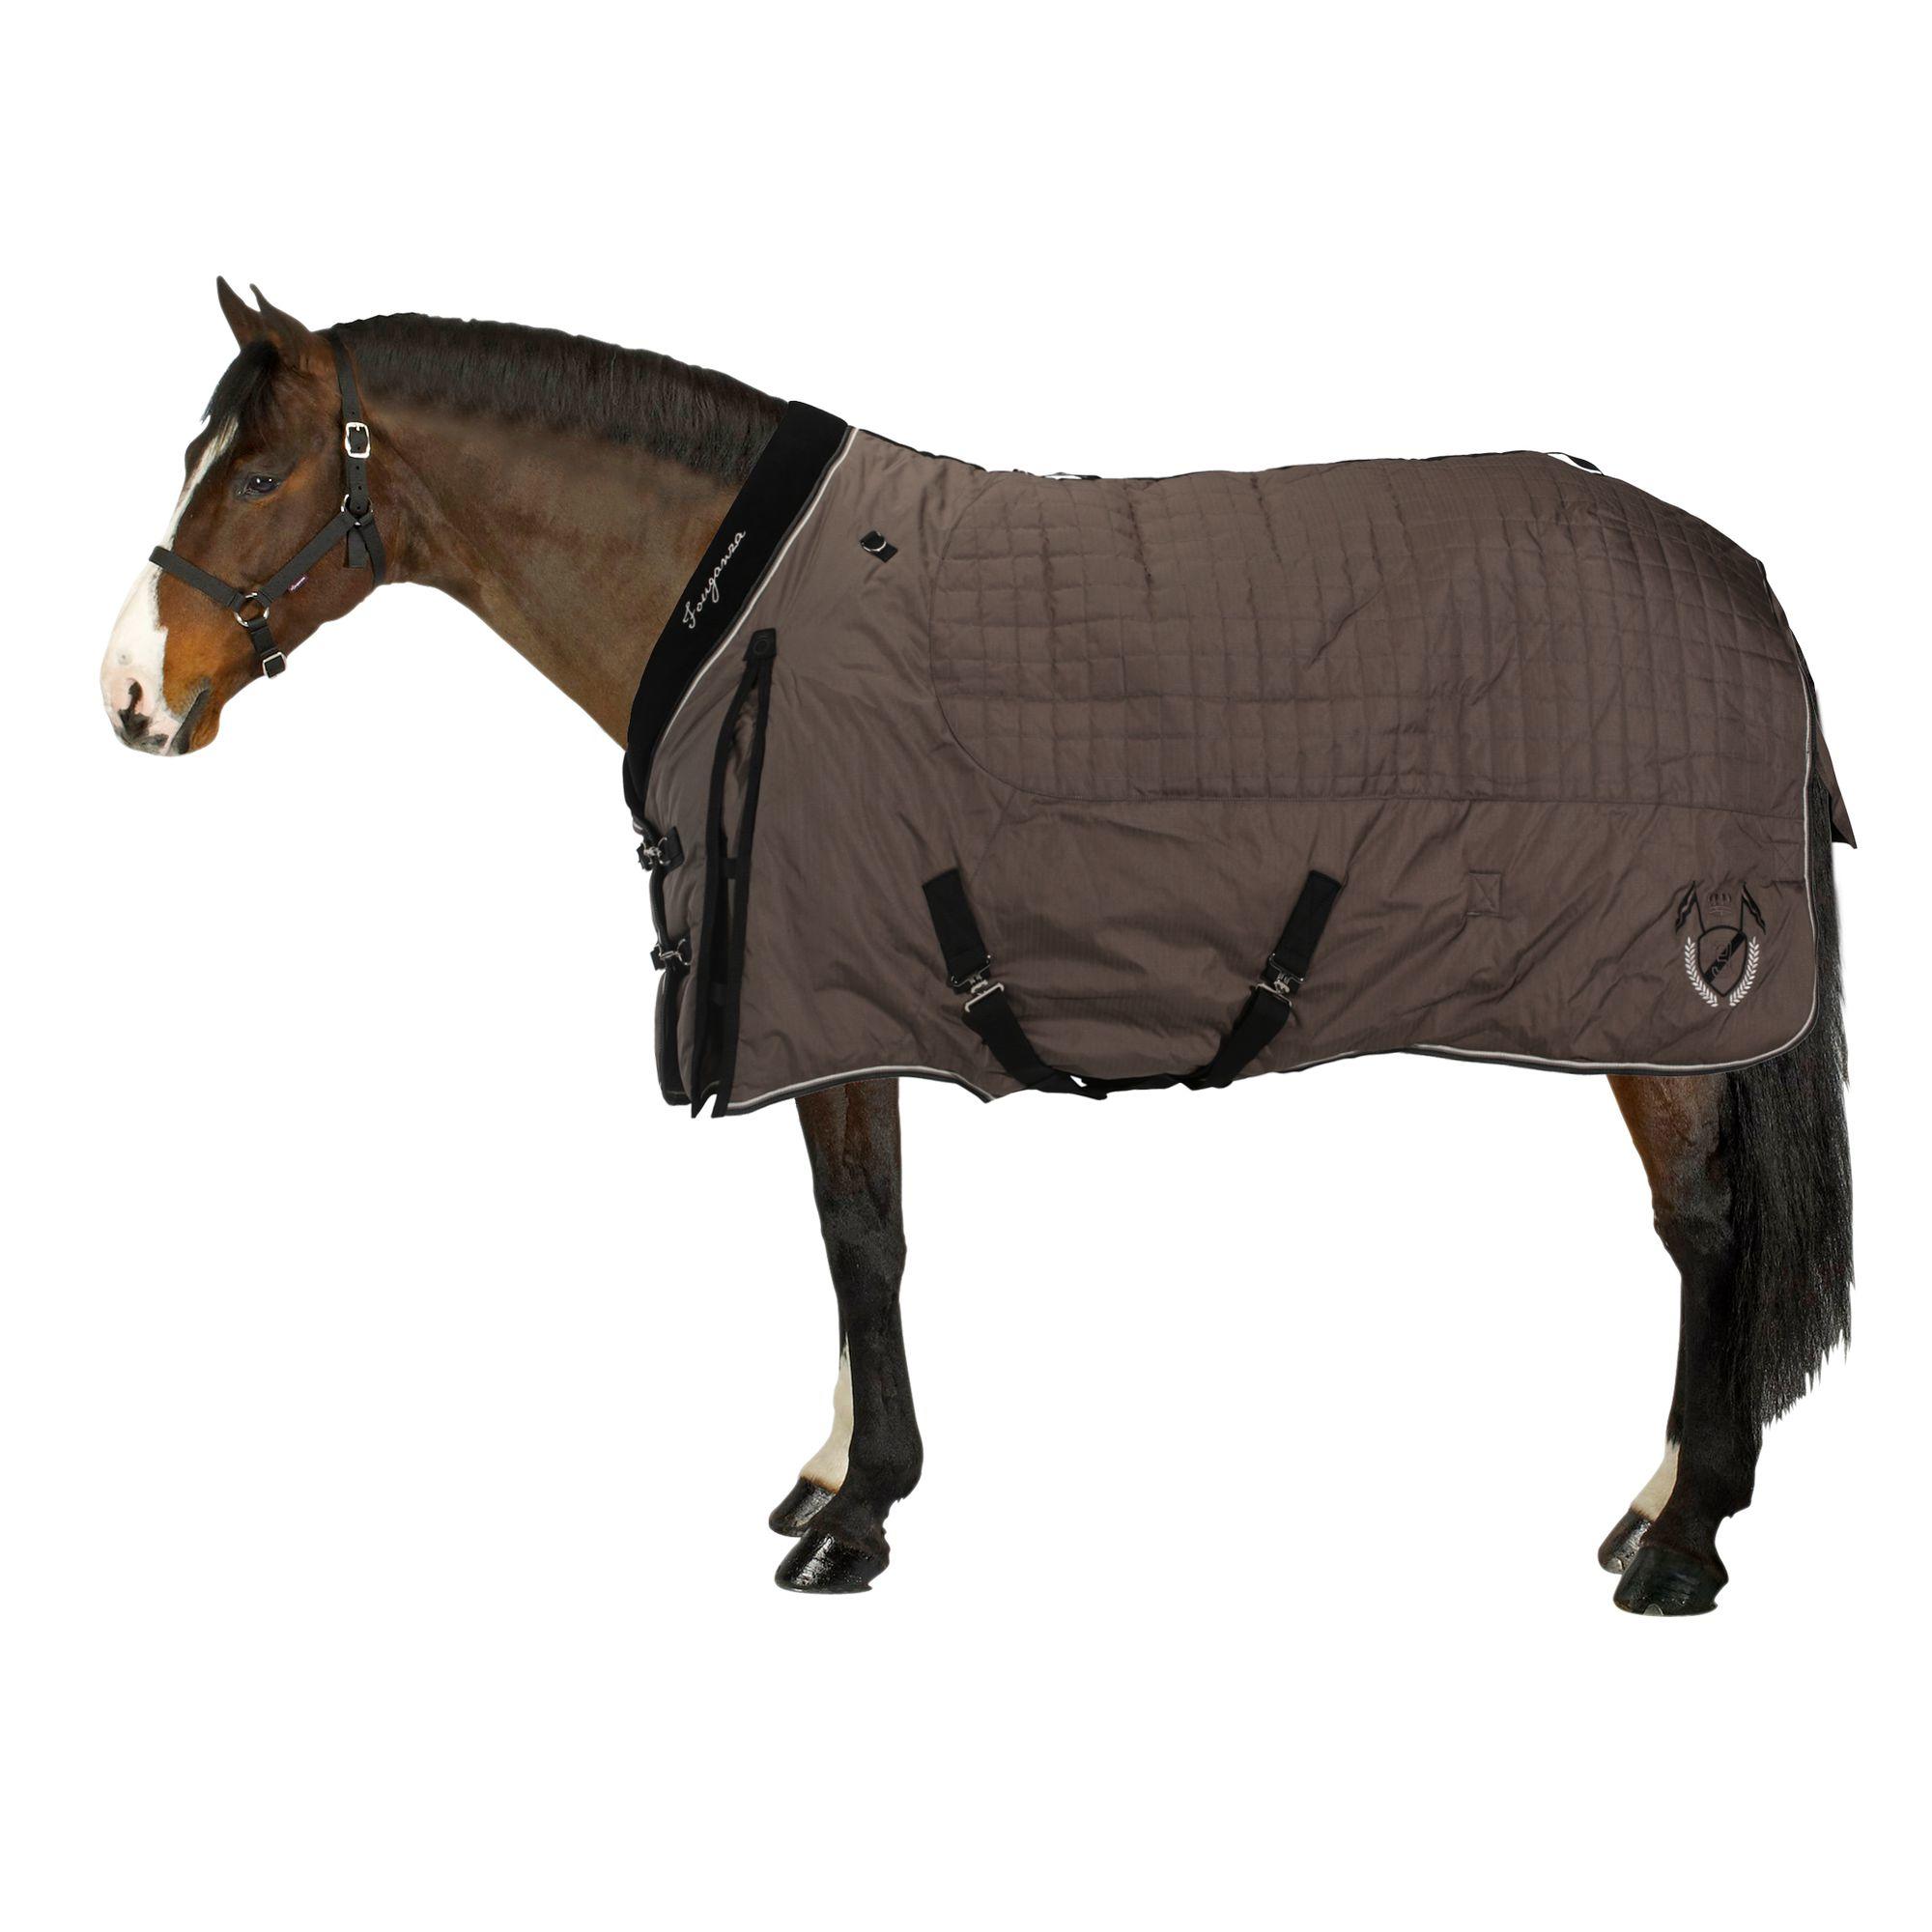 FOUGANZA Stable 400 Horse Riding Stable Rug for Horse and Pony - Brown